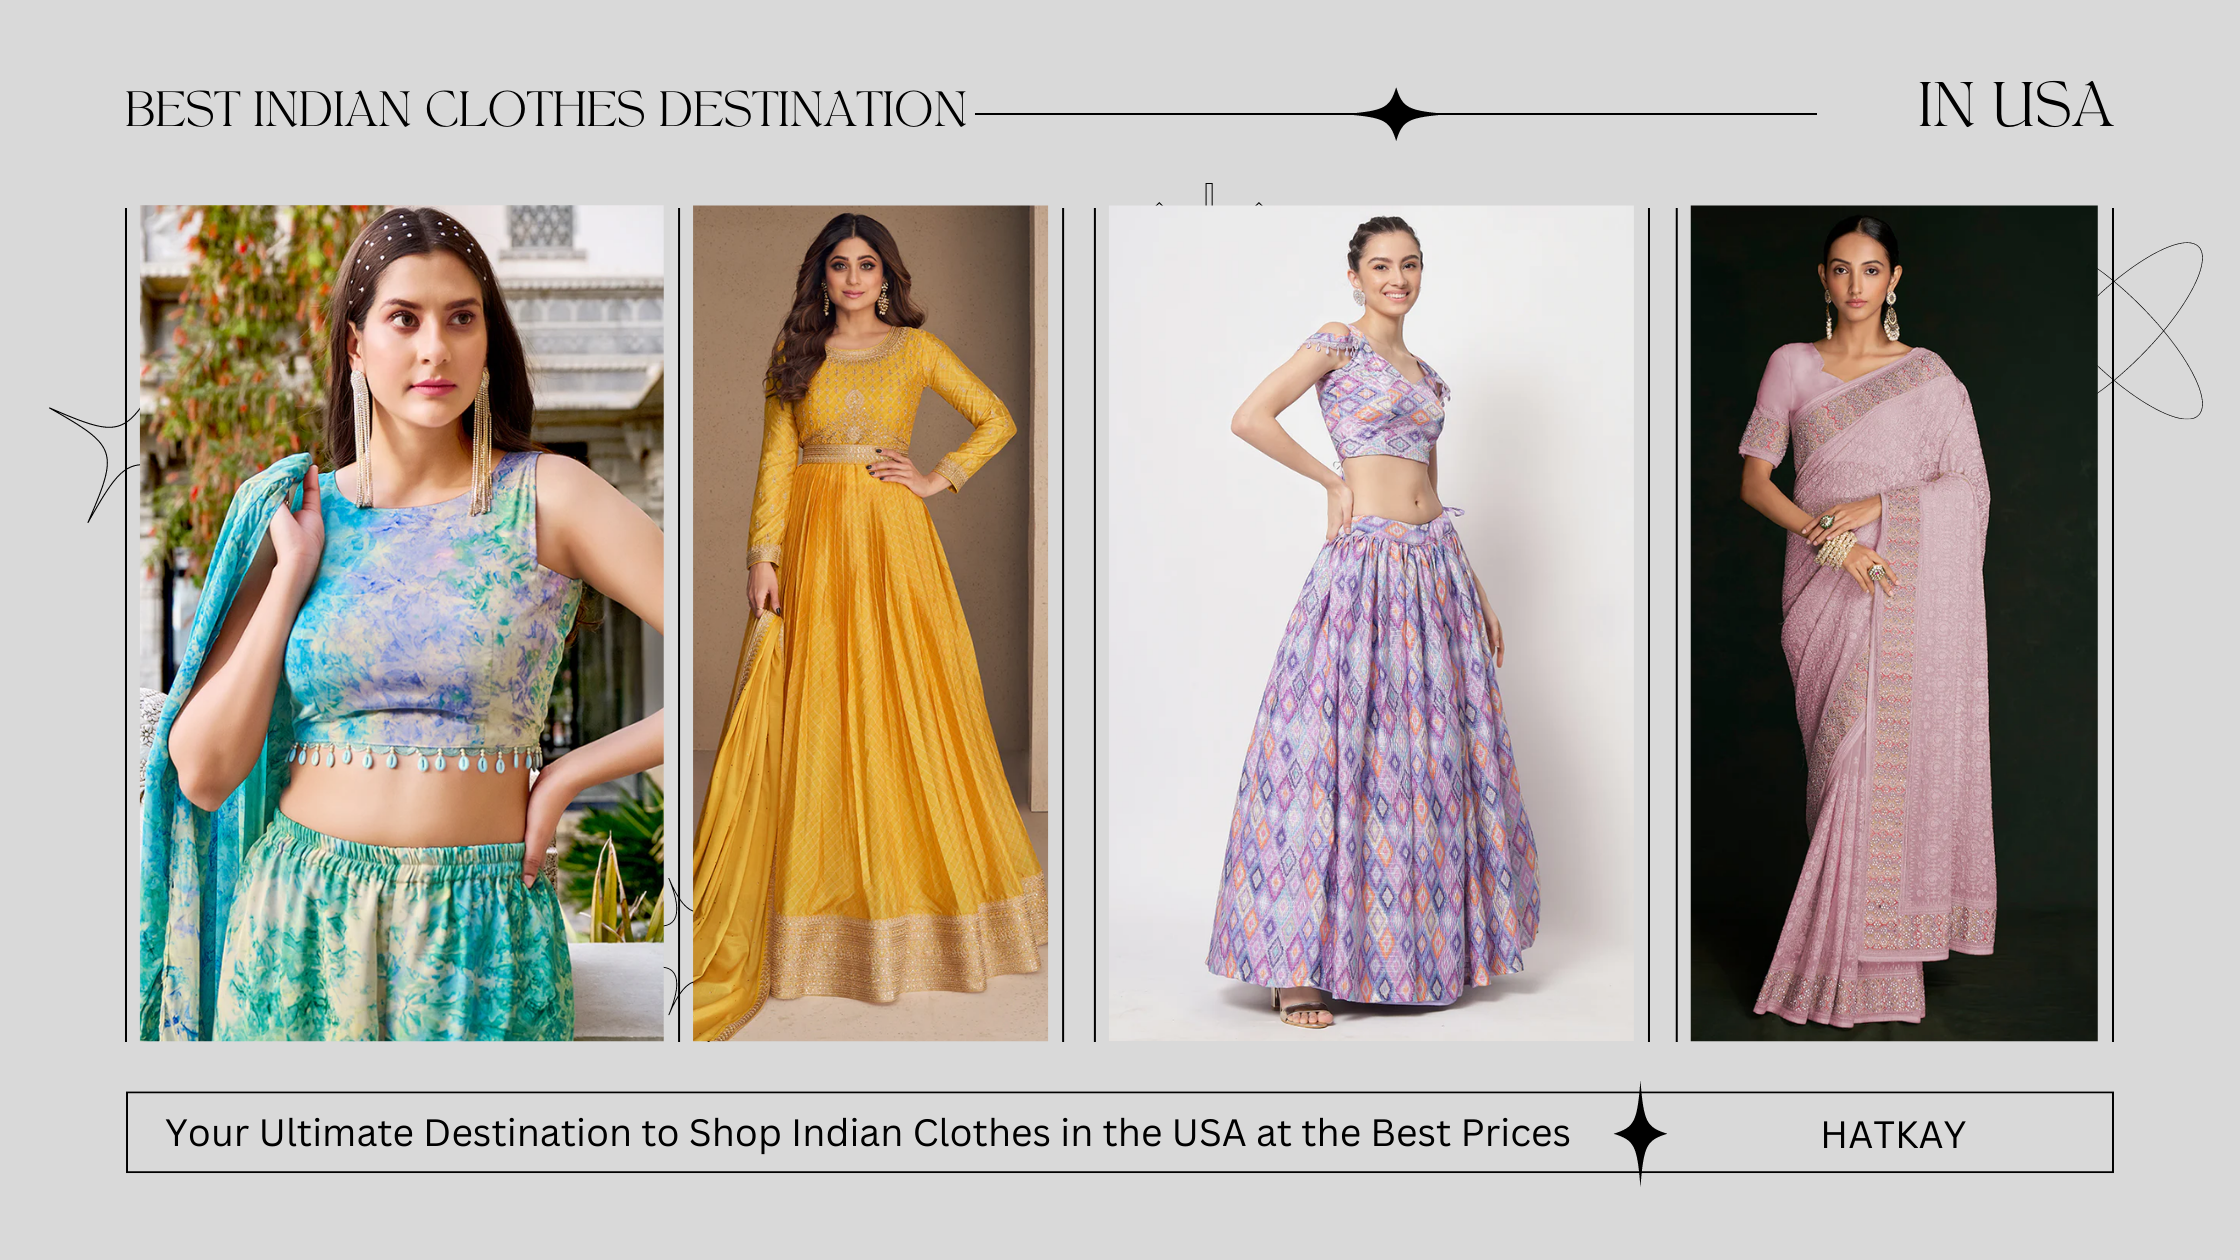 Hatkay: Your Ultimate Destination to Shop Indian Clothes in the USA at the Best Prices